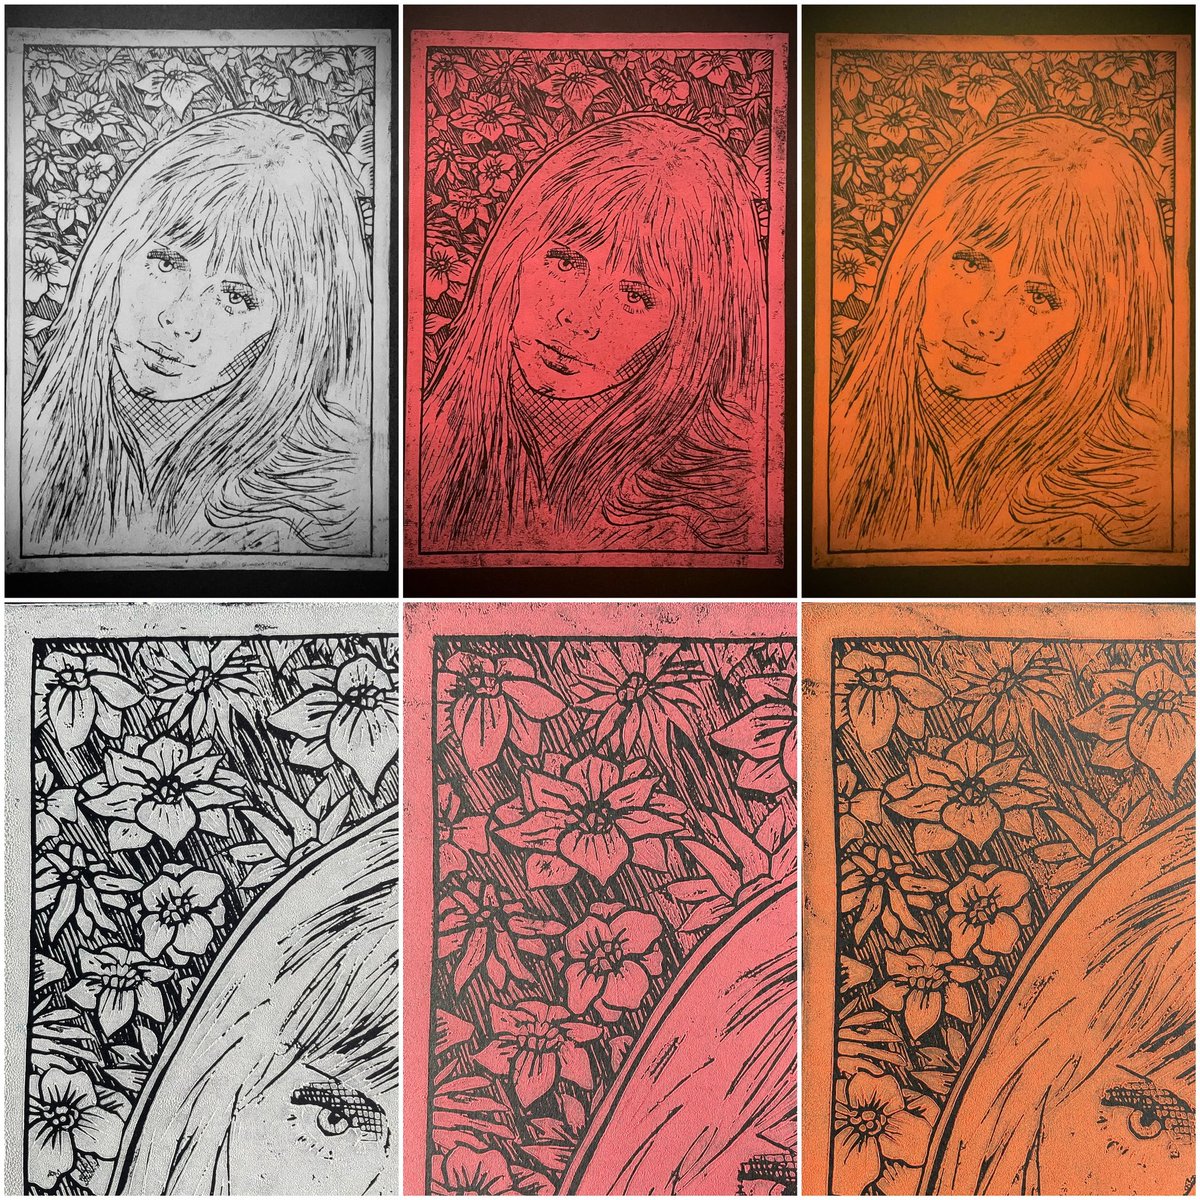 As it’s the First day of May I thought I’d show my Britt Ekland in The Wicker Man portraits from last year! @BrittEkland #brittekland